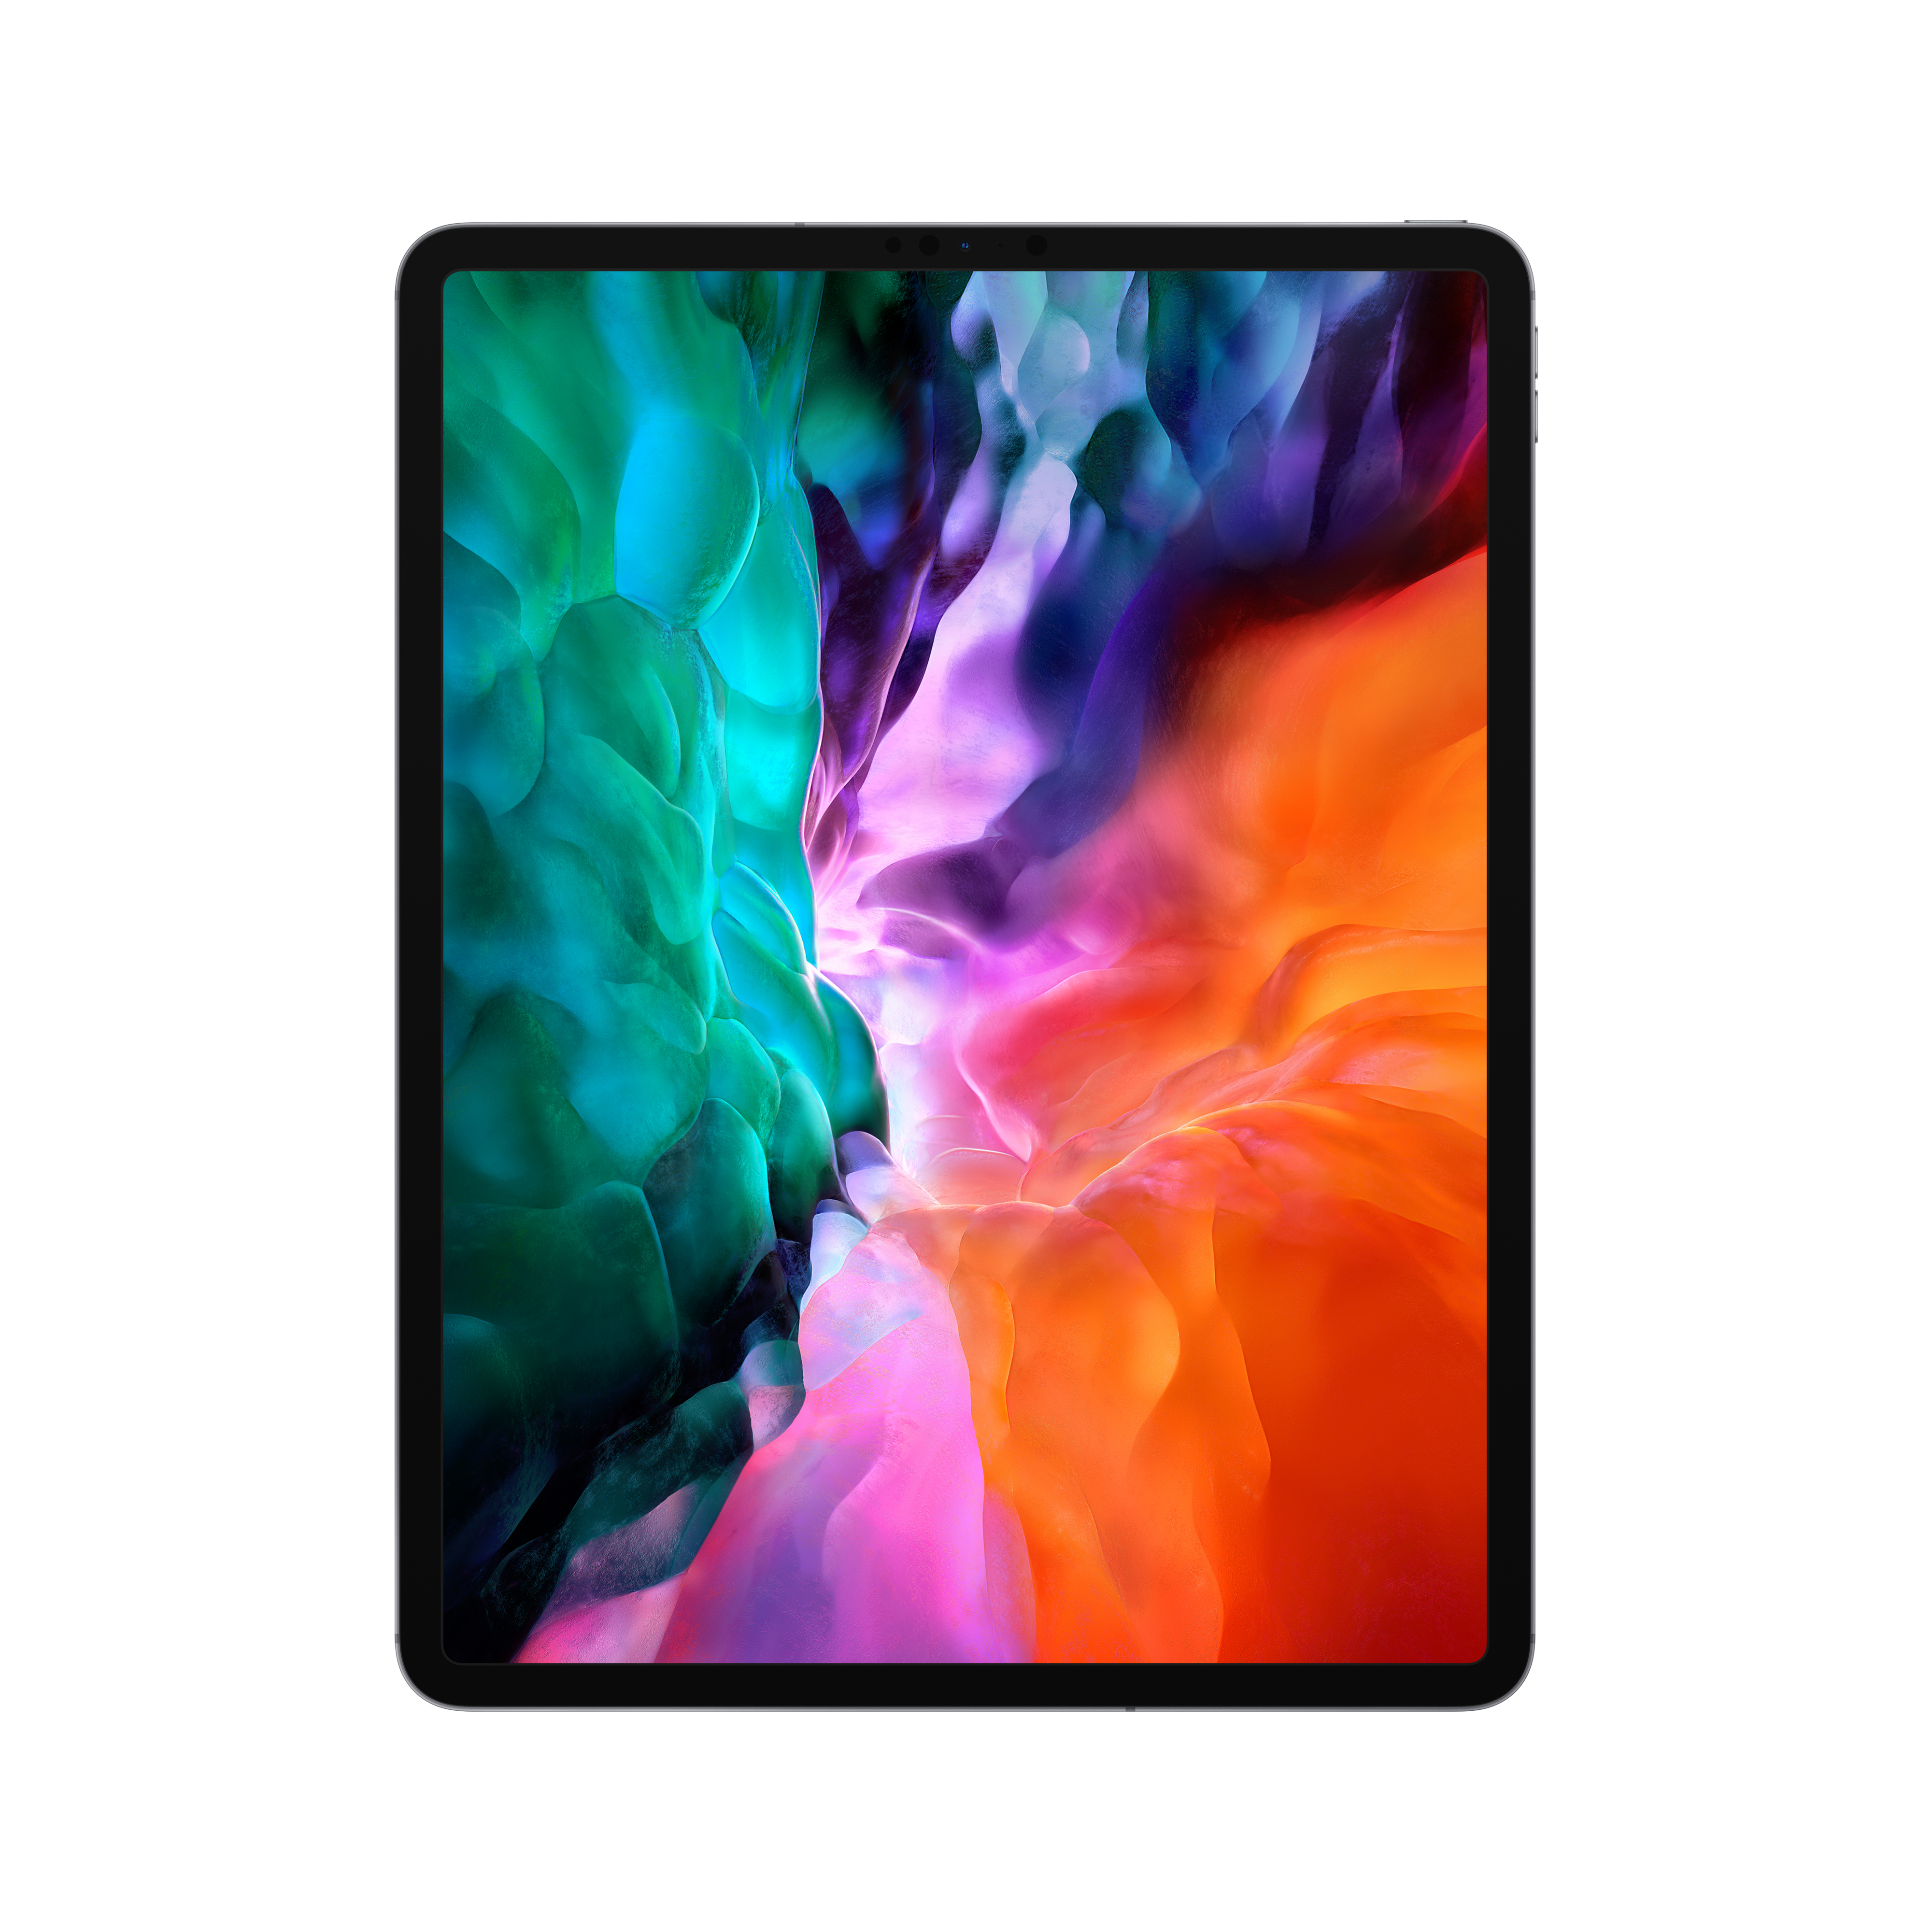 Apple 12.9-inch iPad Pro (2020) Wi-Fi + Cellular 512GB - Space Gray - image 5 of 10